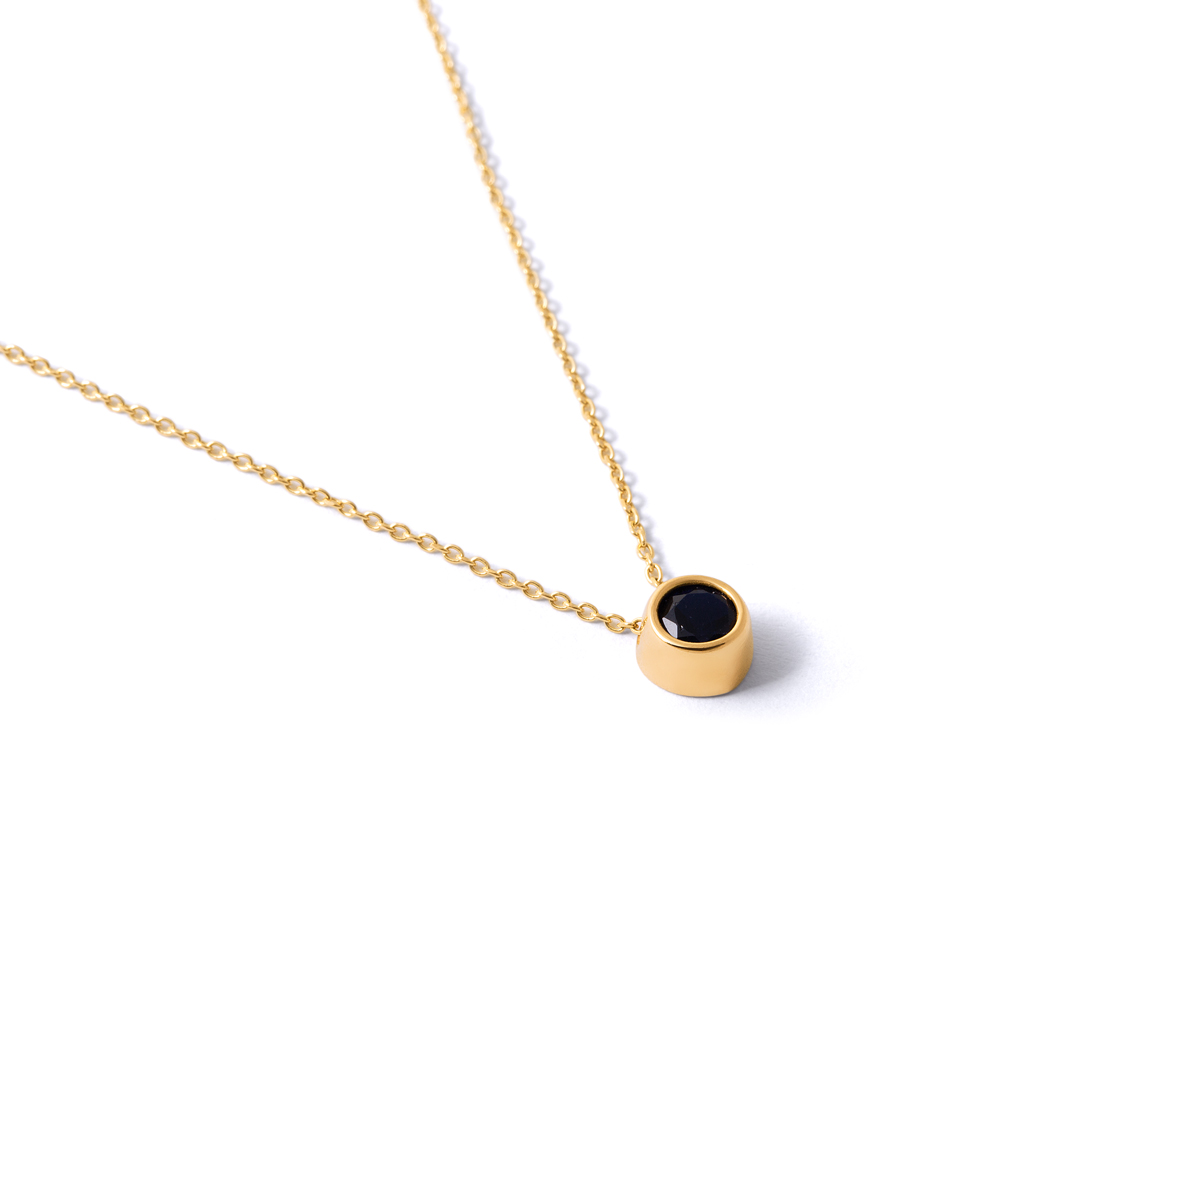 Narmela circle gold necklace in navy blue g